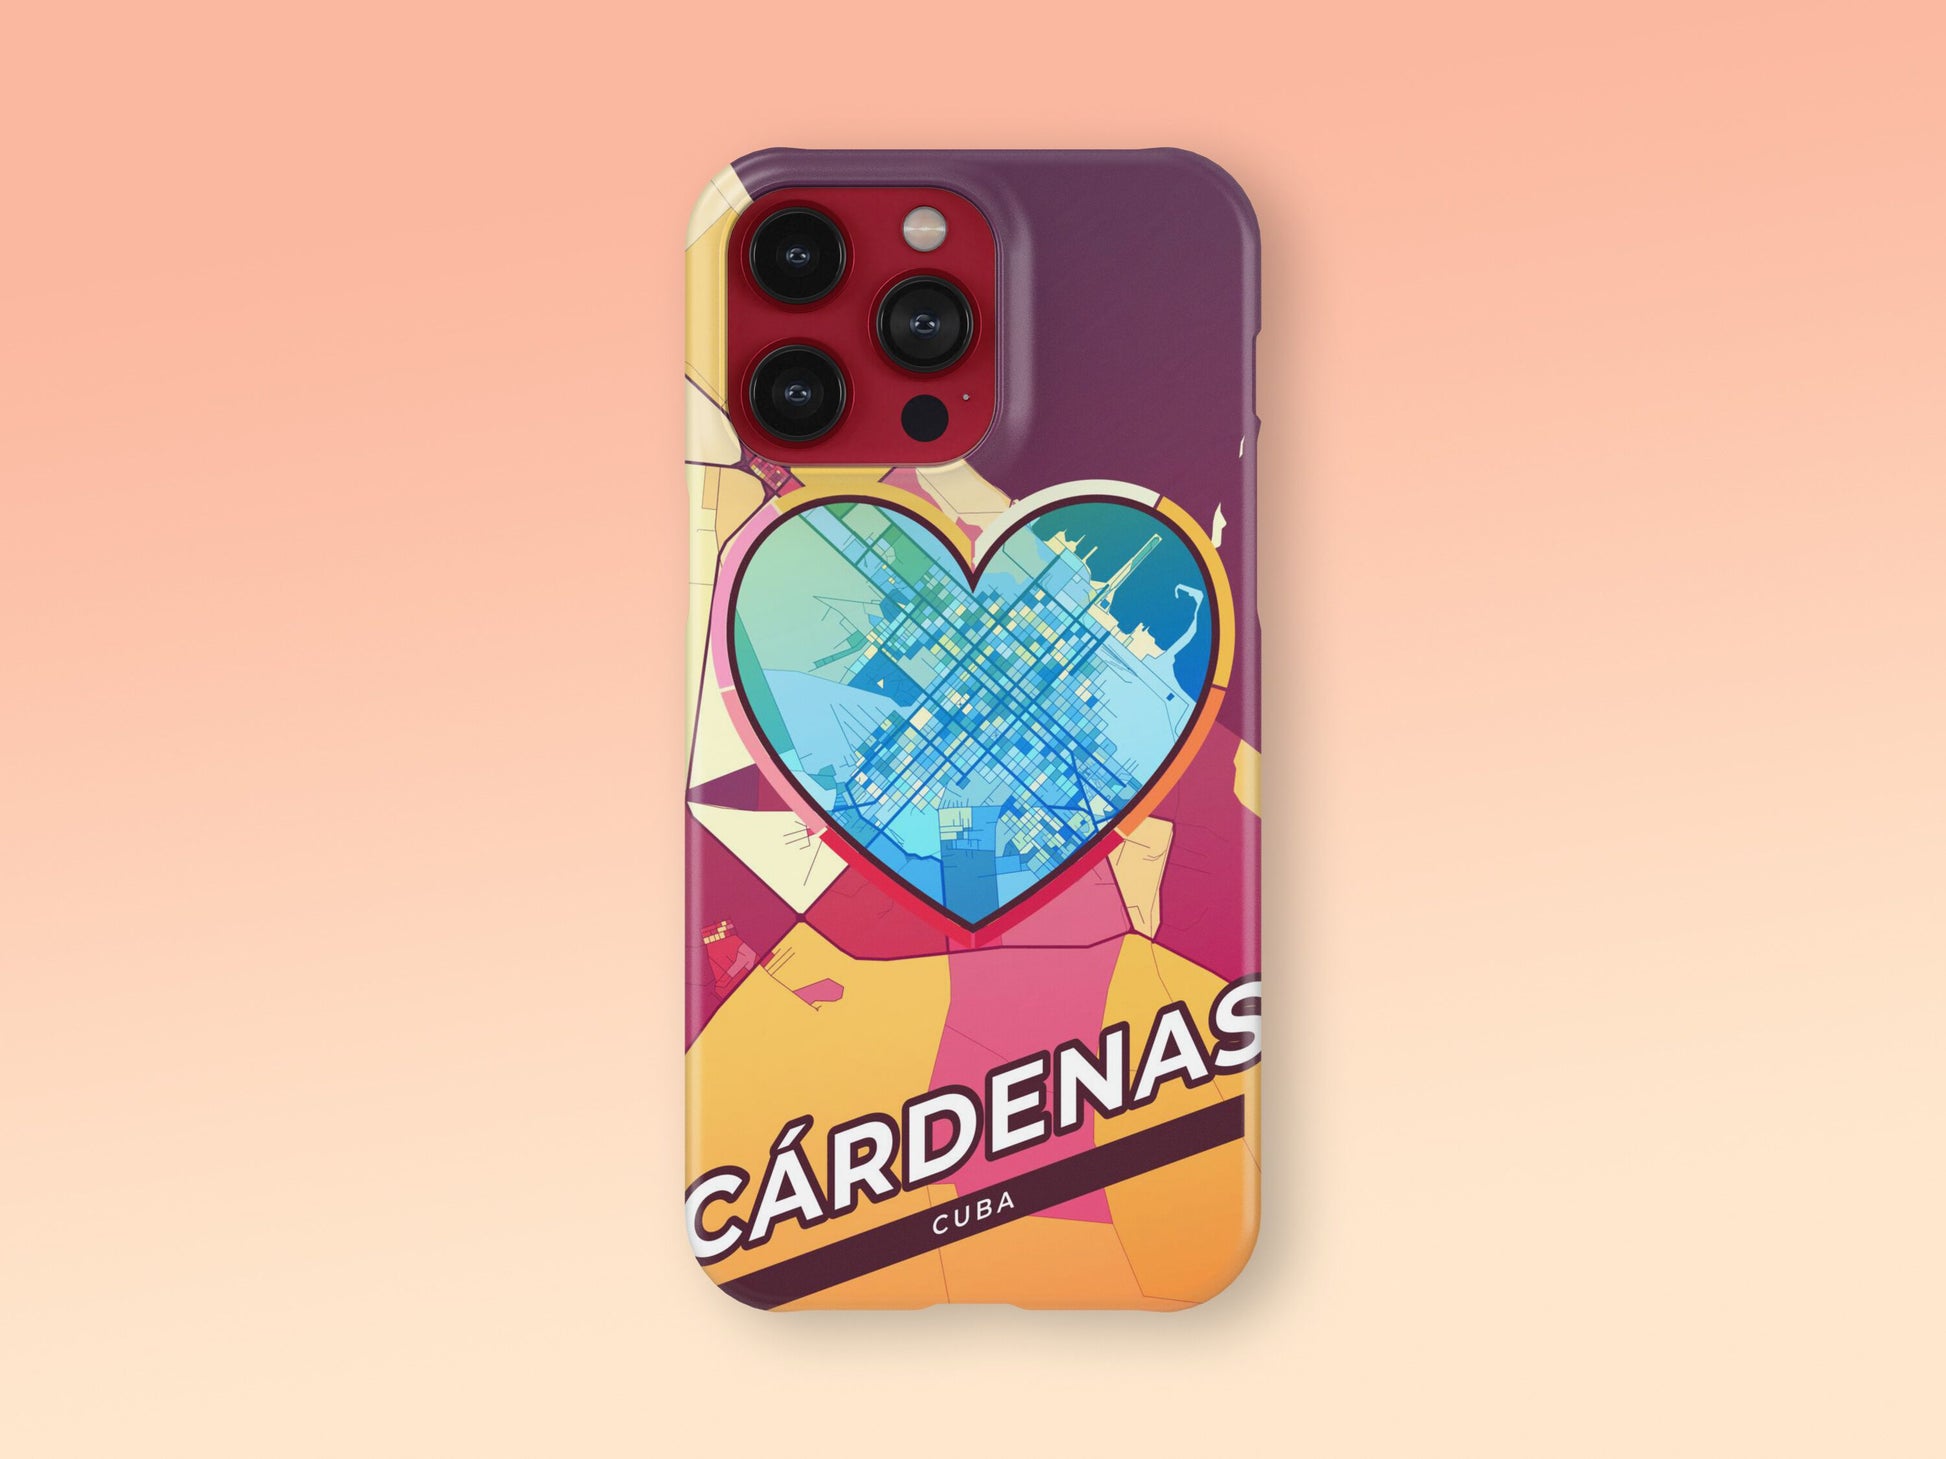 Cárdenas Cuba slim phone case with colorful icon. Birthday, wedding or housewarming gift. Couple match cases. 2